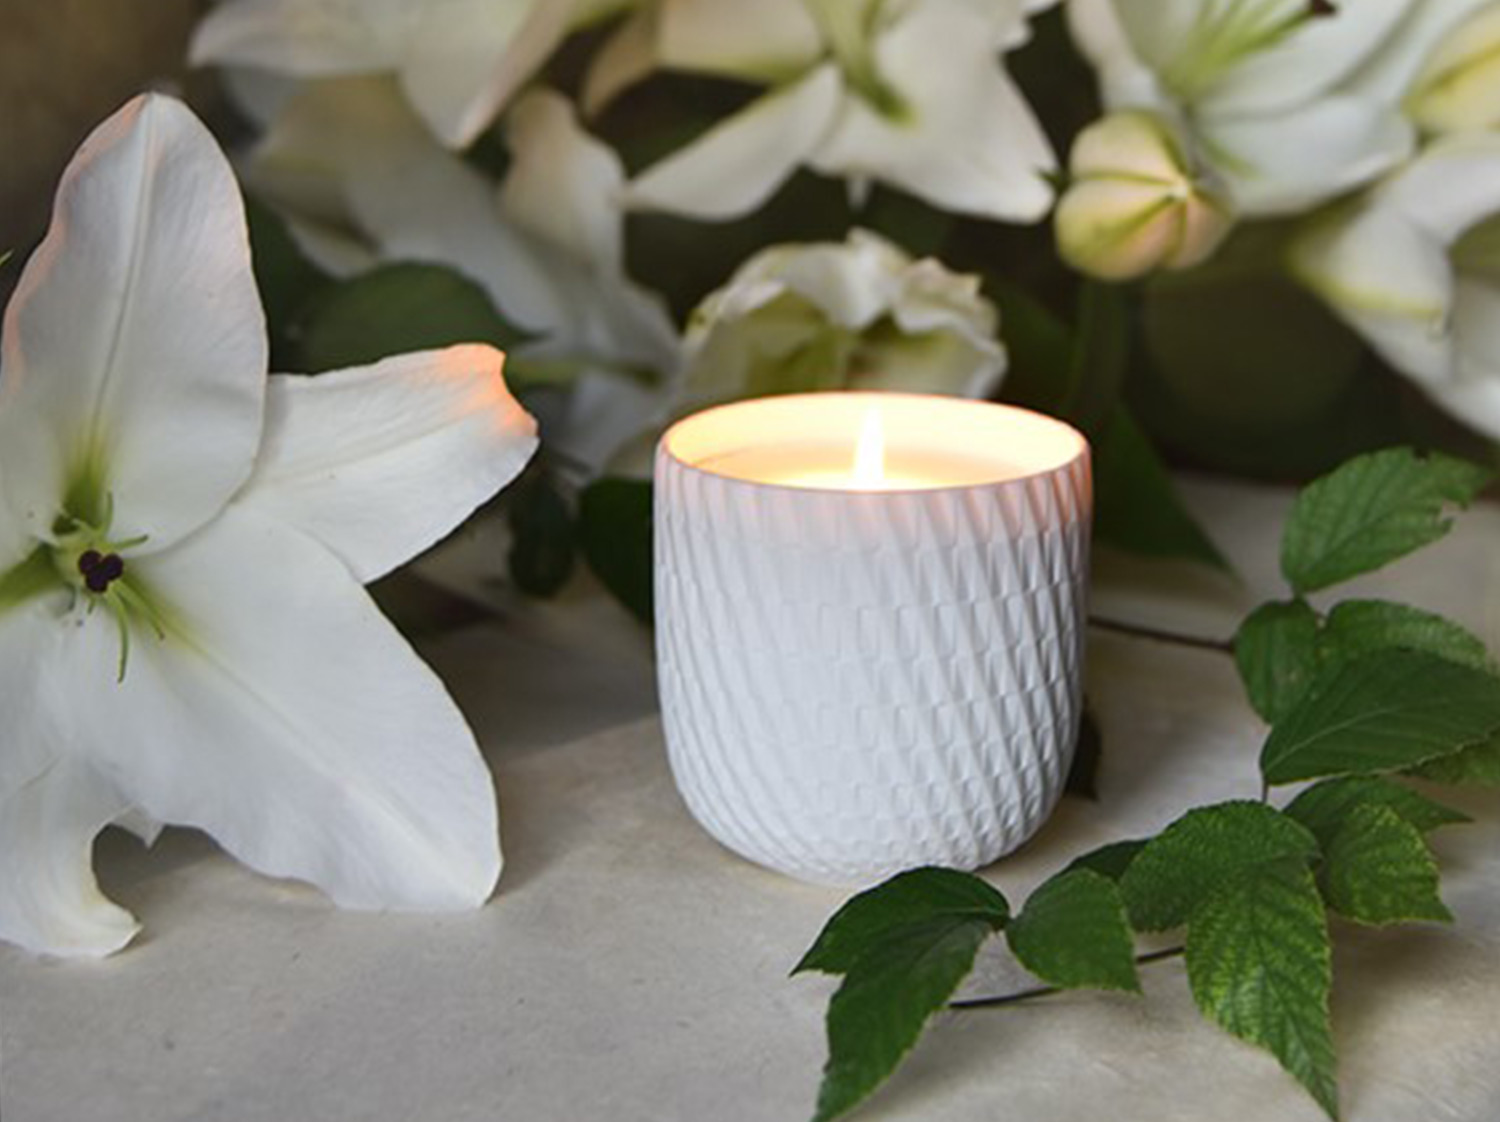 Arbor Made Refillable Candles